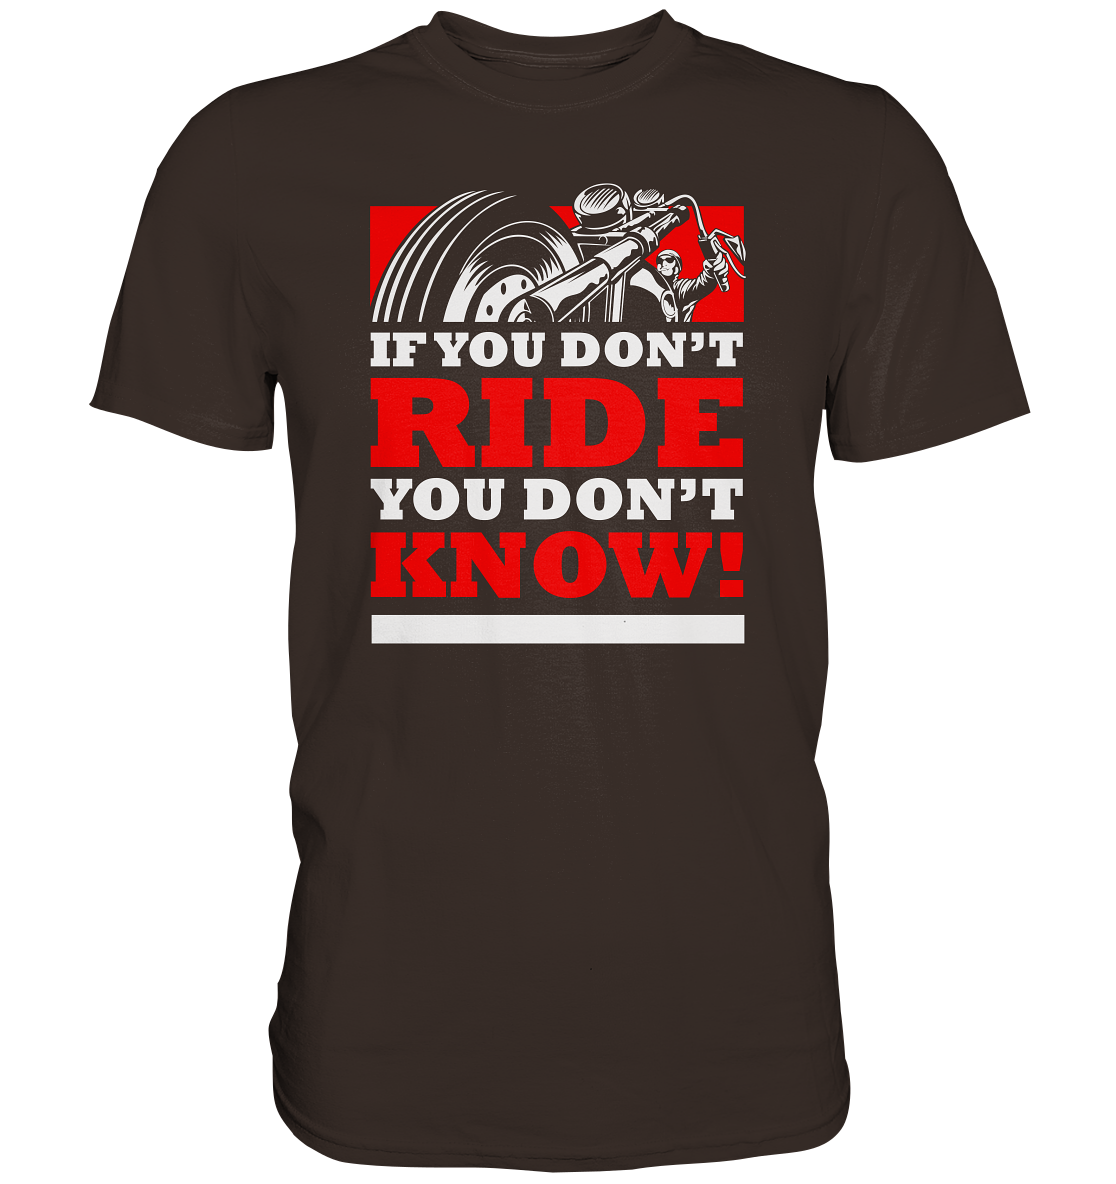 If you dont ride, you dont know - Premium unisex Shirt